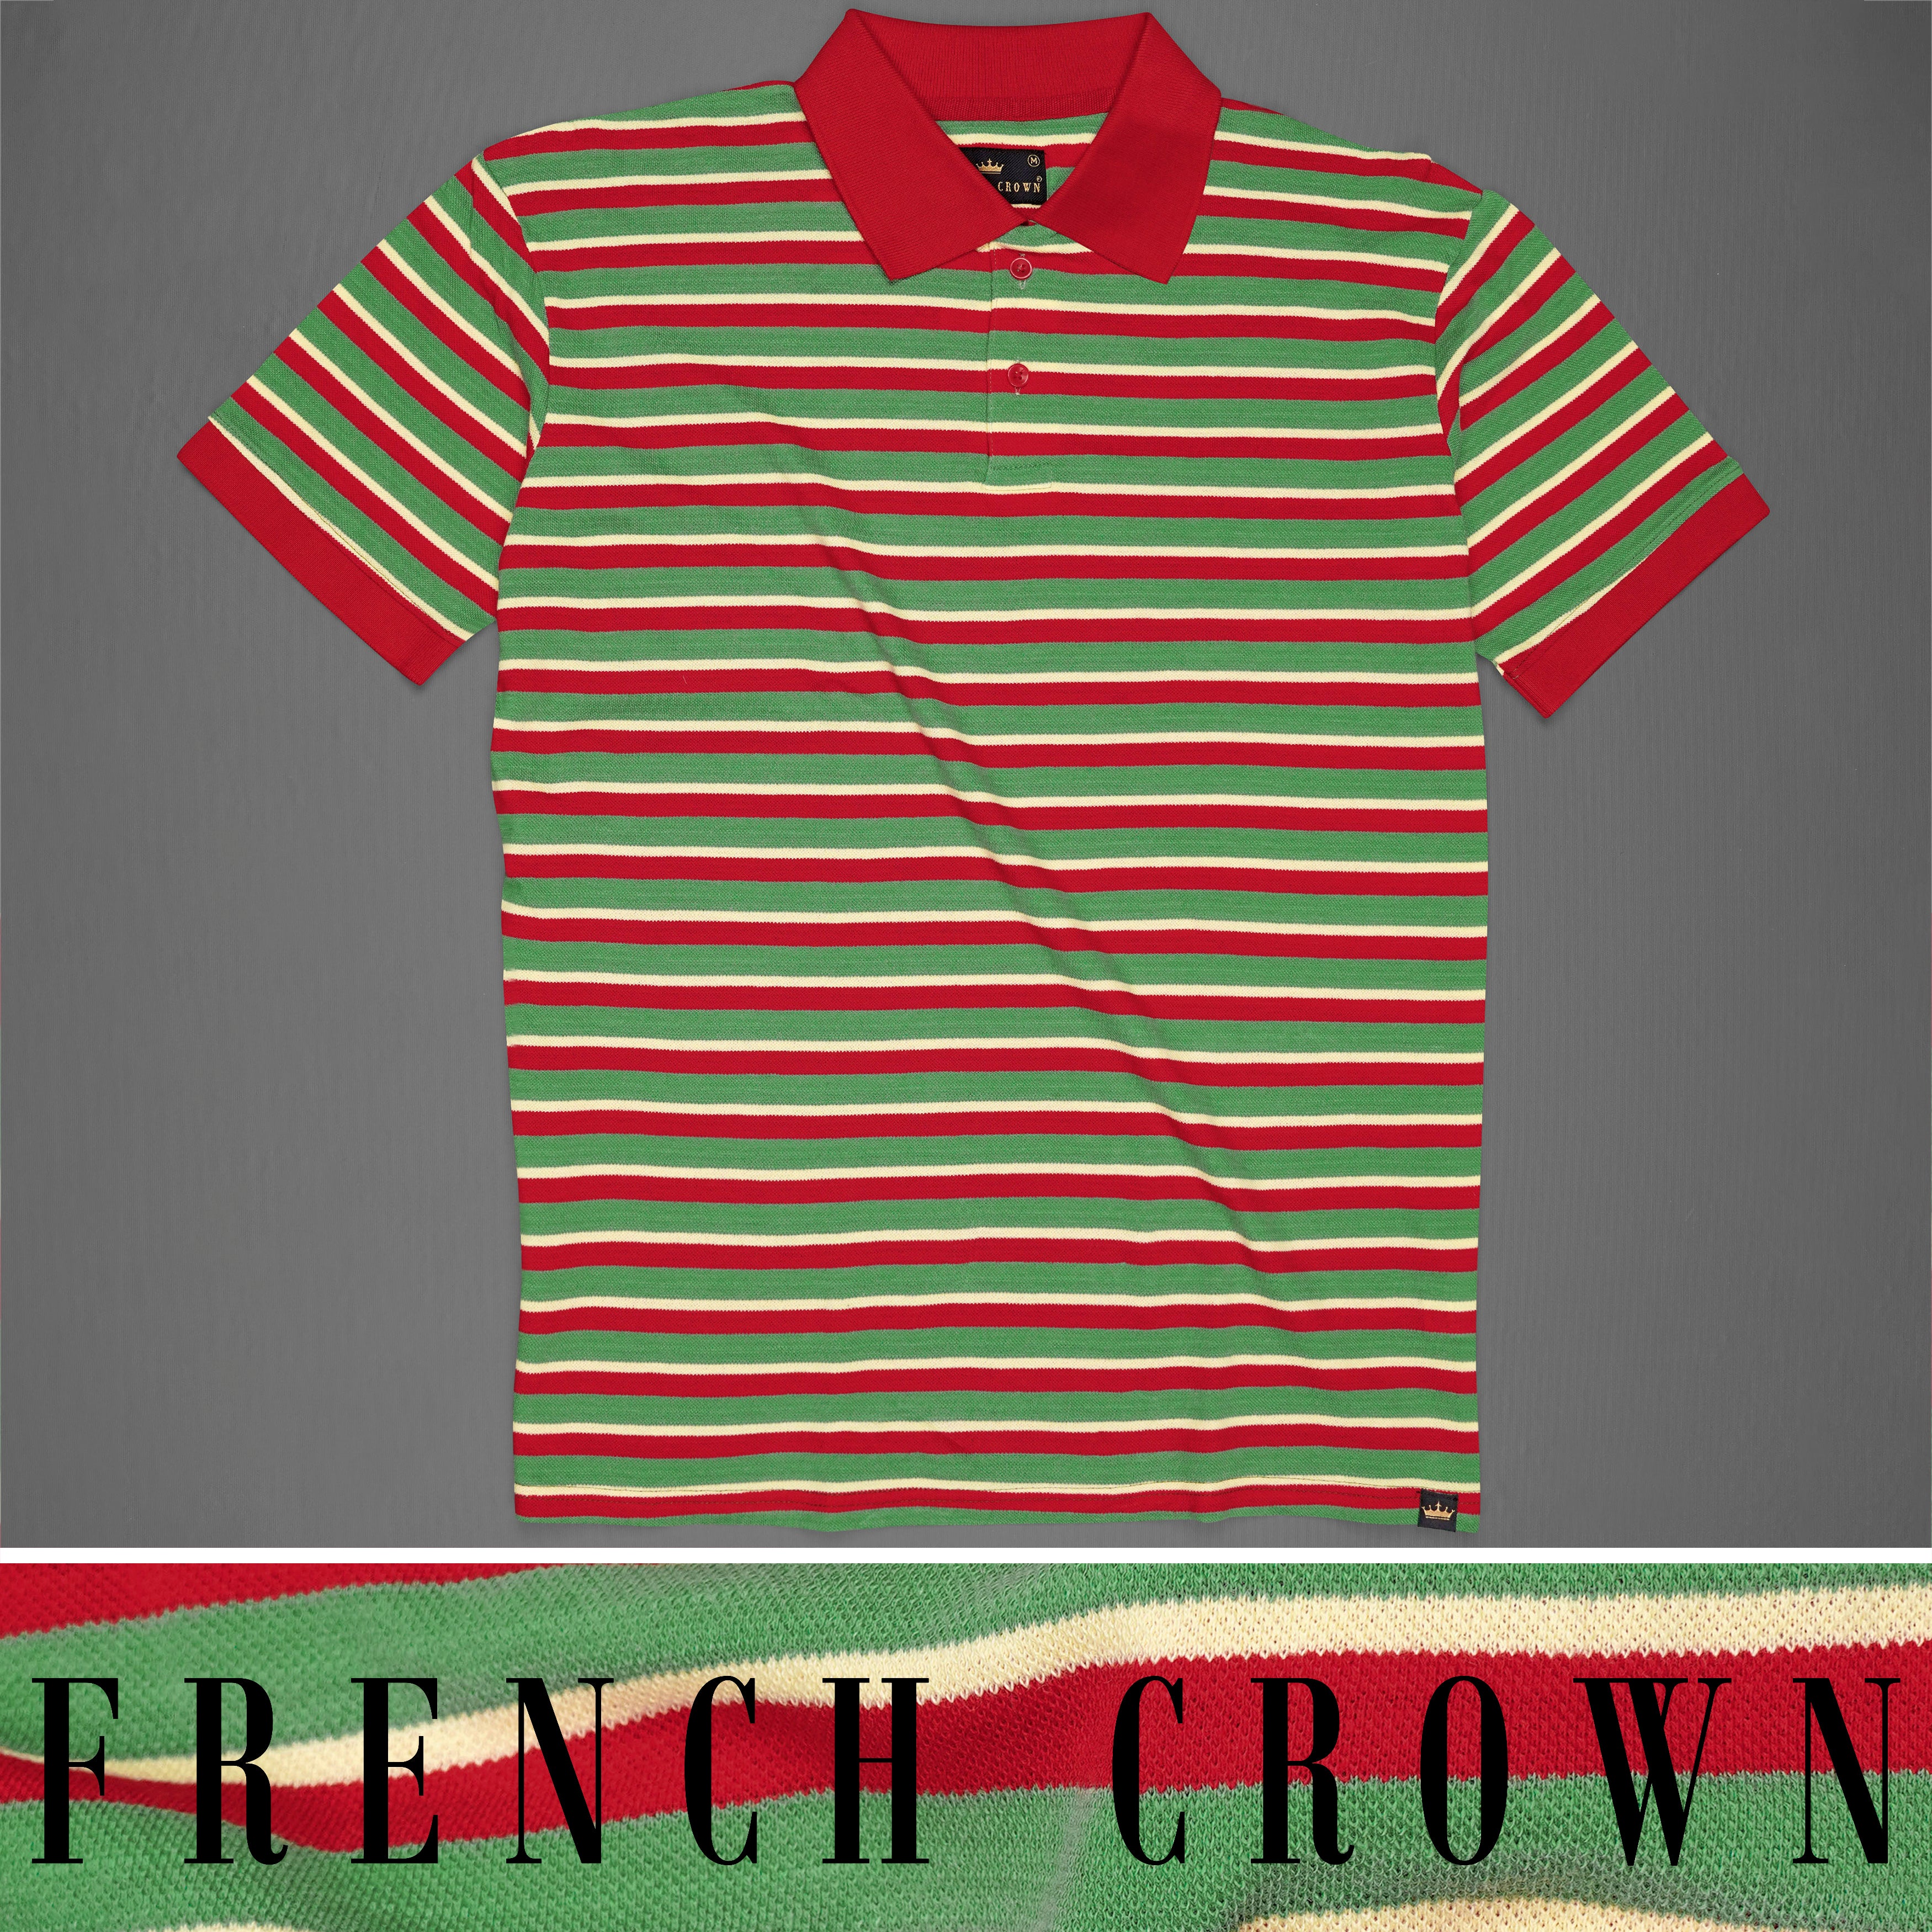 Moss Green with Mexican Red Half Sleeves Super Soft Premium Cotton